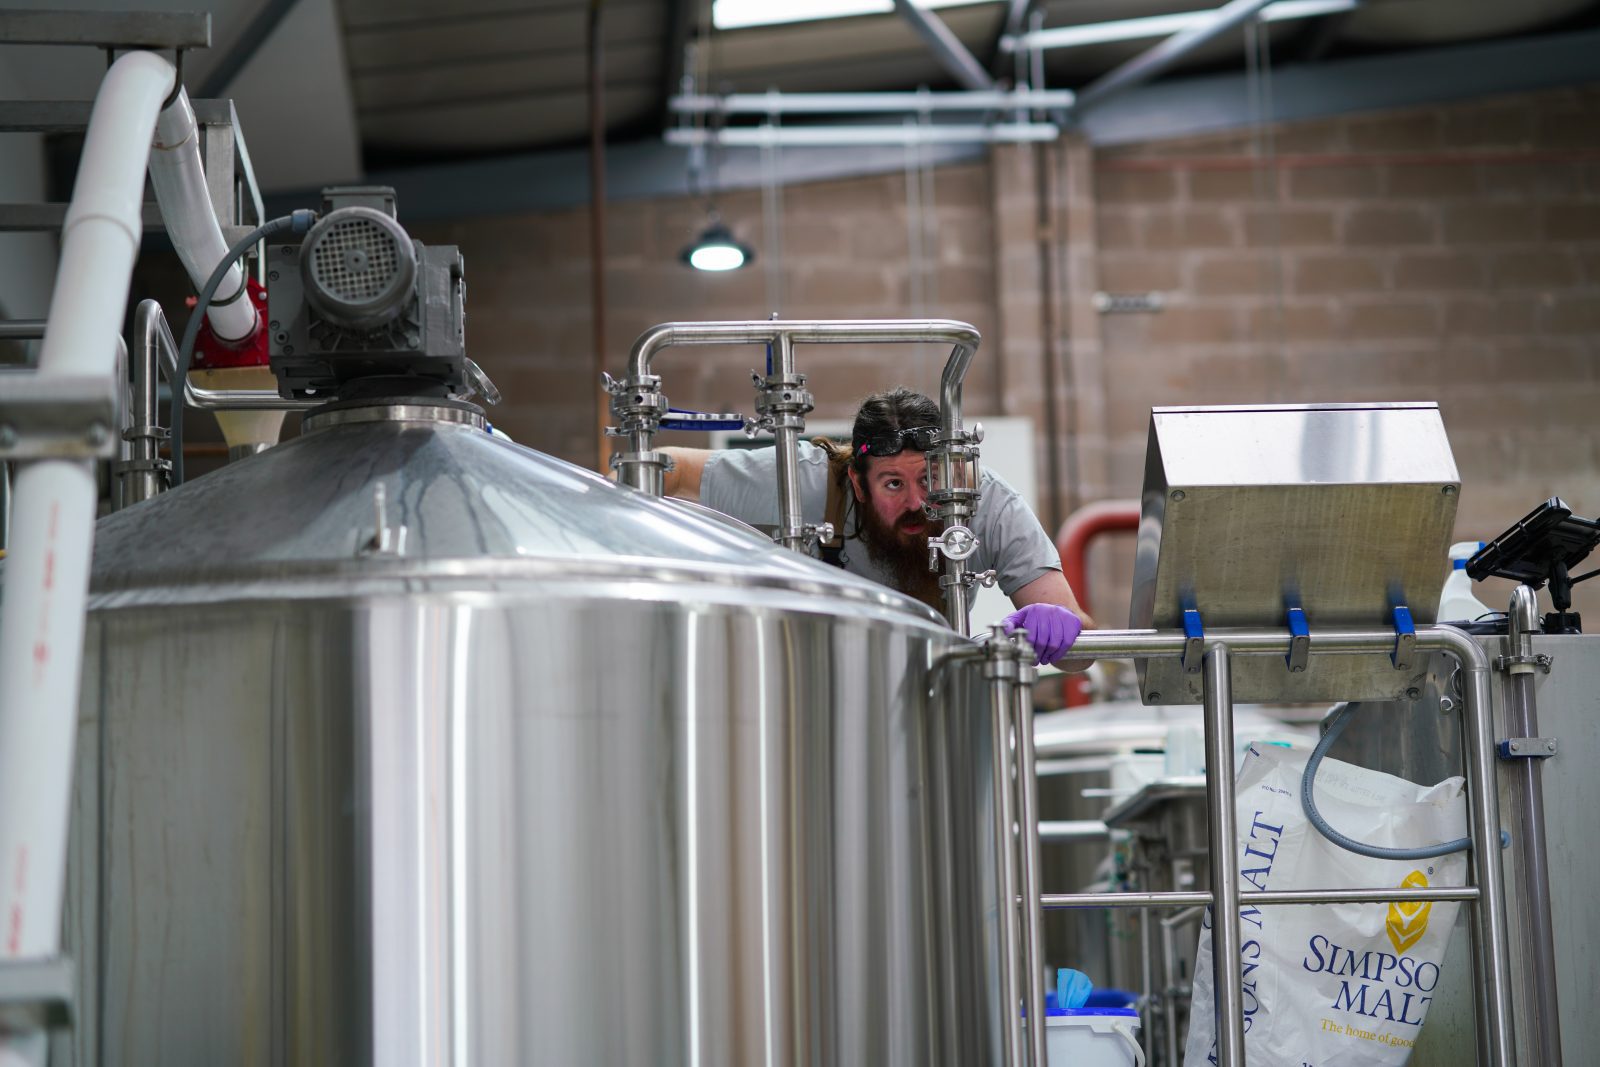 Cloudwater is opening a new beer hall inside a former Victorian shipping warehouse, The Manc